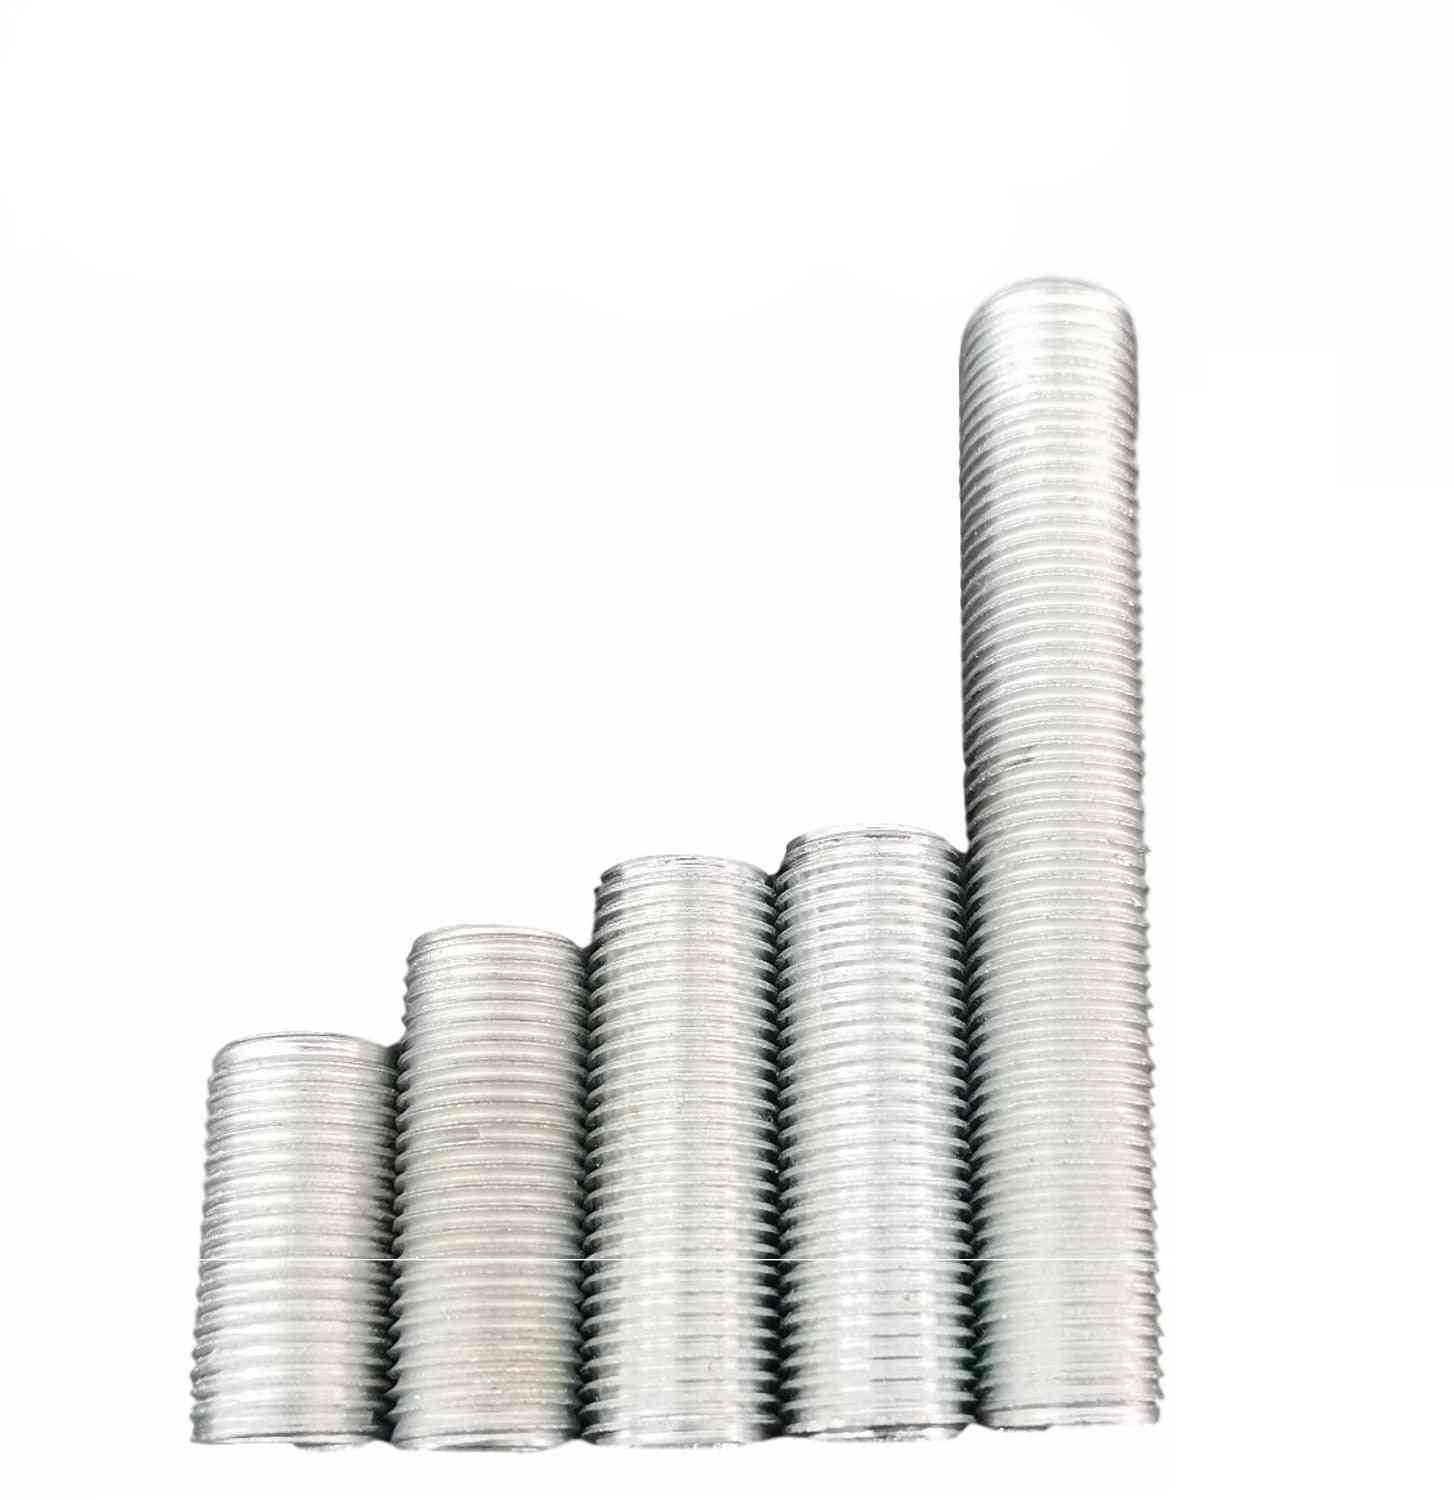 Screws And Nuts Commonly Used Diy Tool Accessories